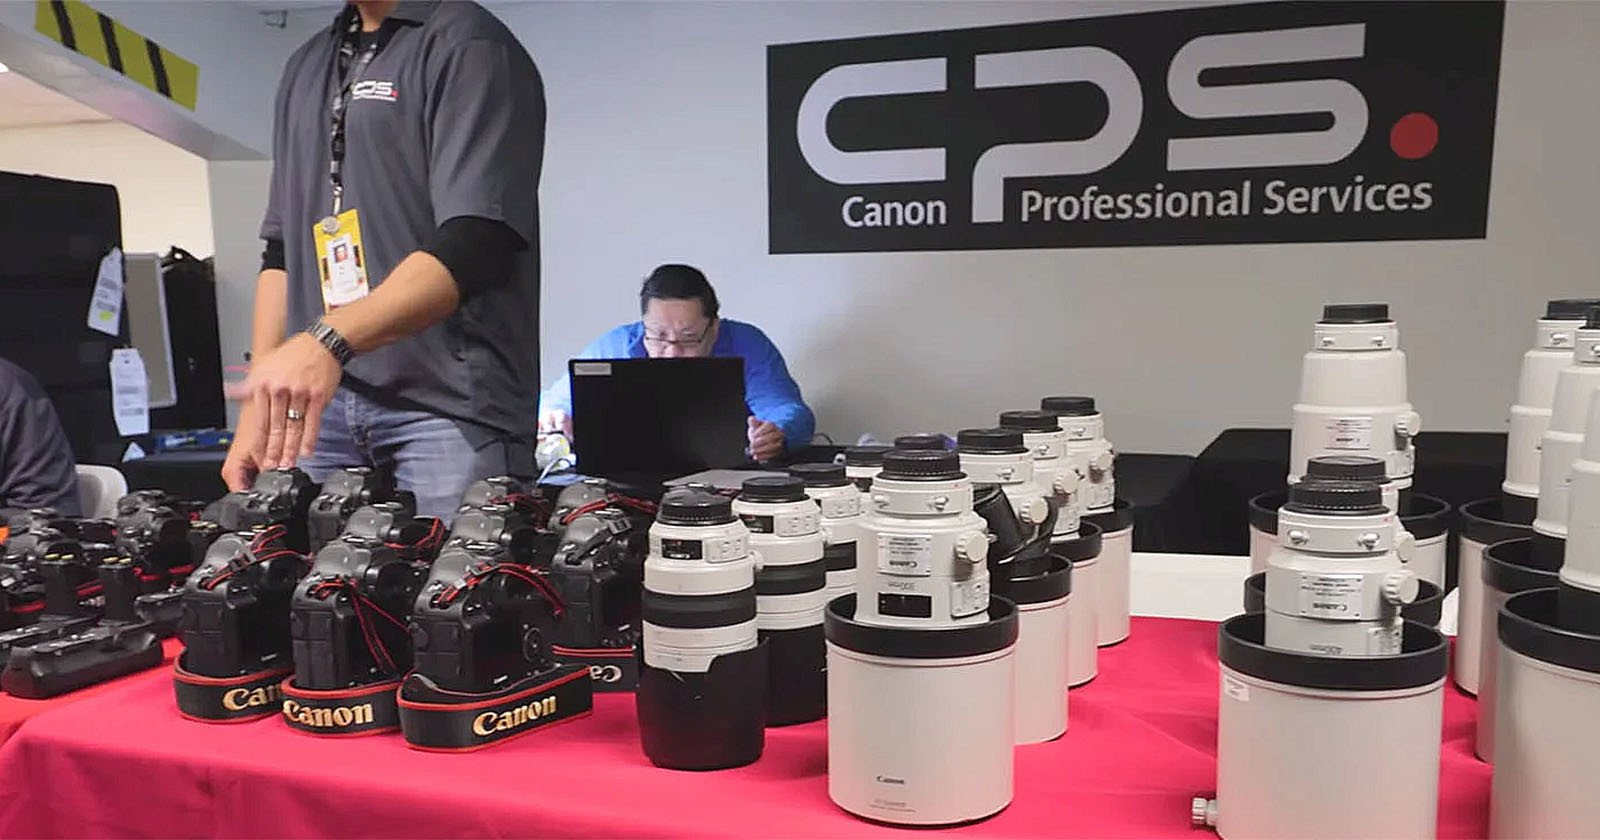 Canon Professional Services: Should You Join CPS as a Photographer?